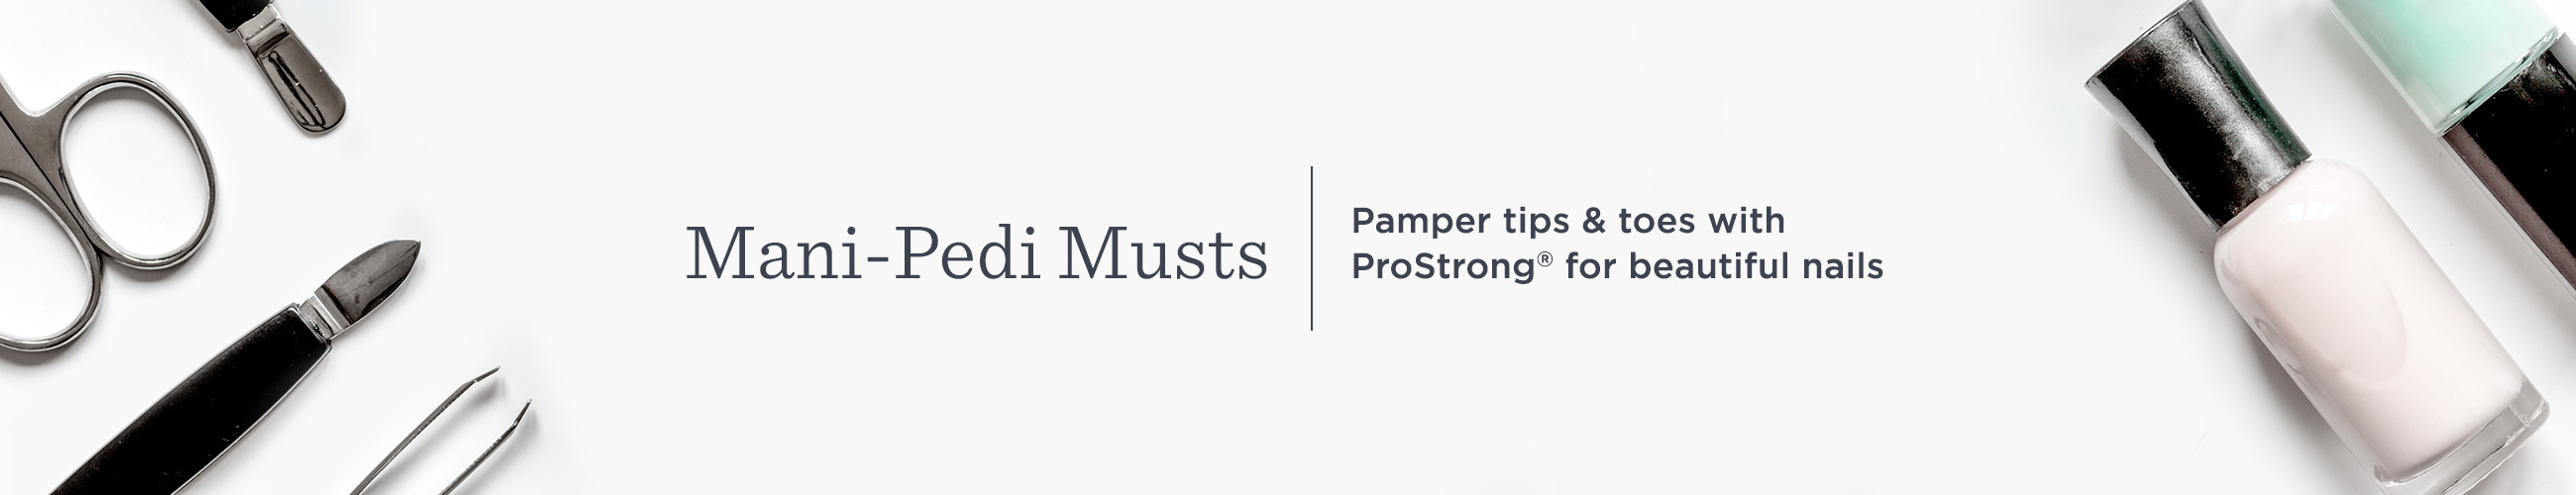 Mani-Pedi Musts. Pamper tips & toes with ProStrong® for beautiful nails